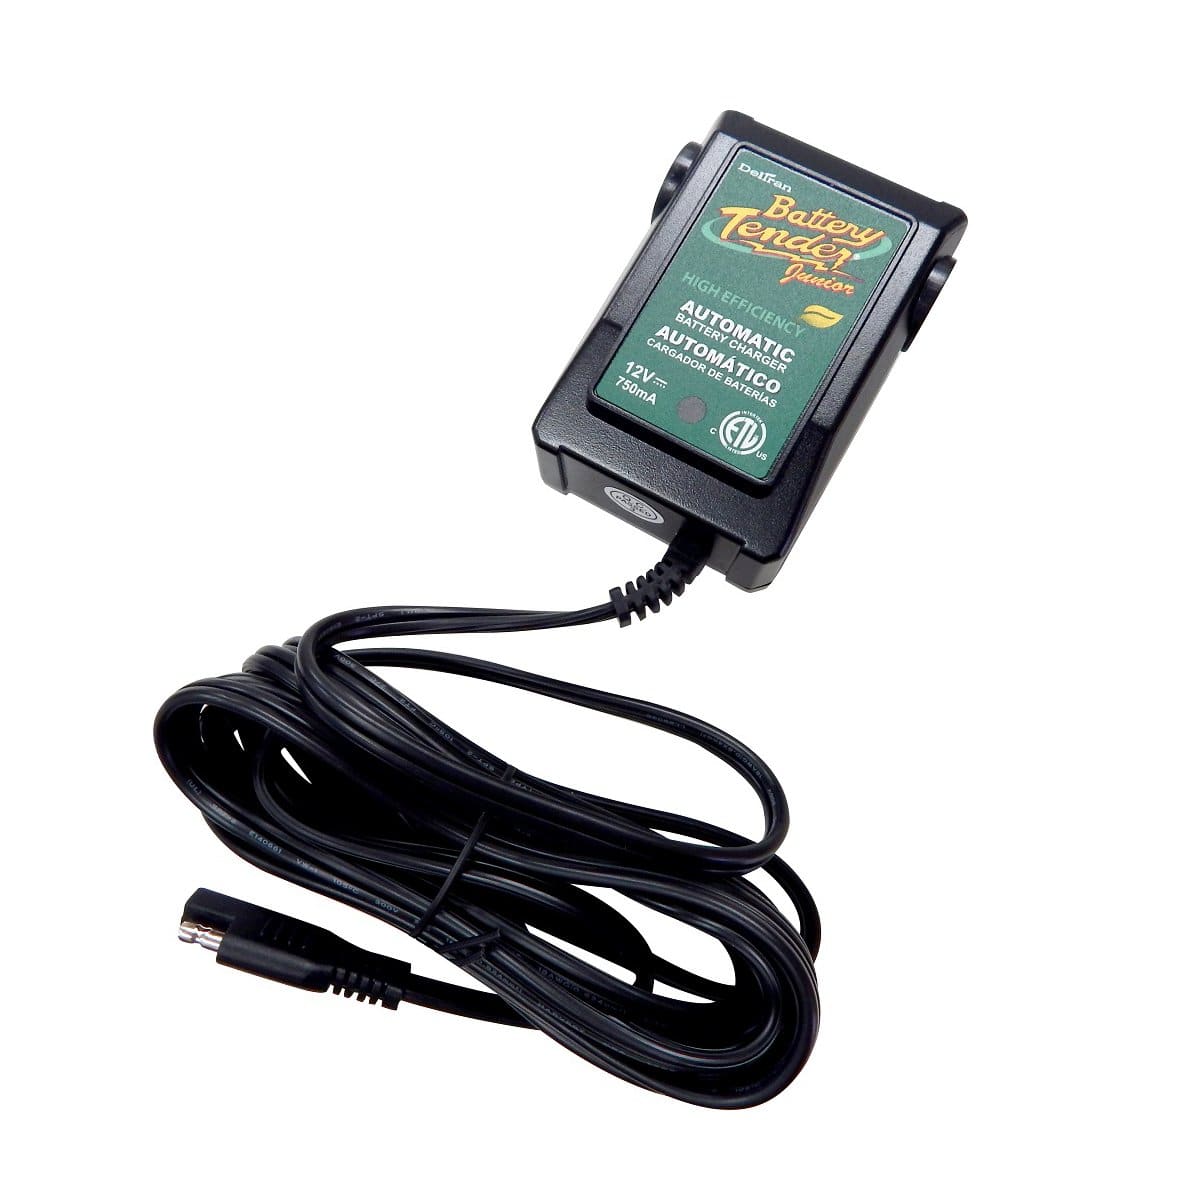 Battery Tender Jr 021-0123 12 Volt 0.75 Amp Fully Automatic Battery Charger